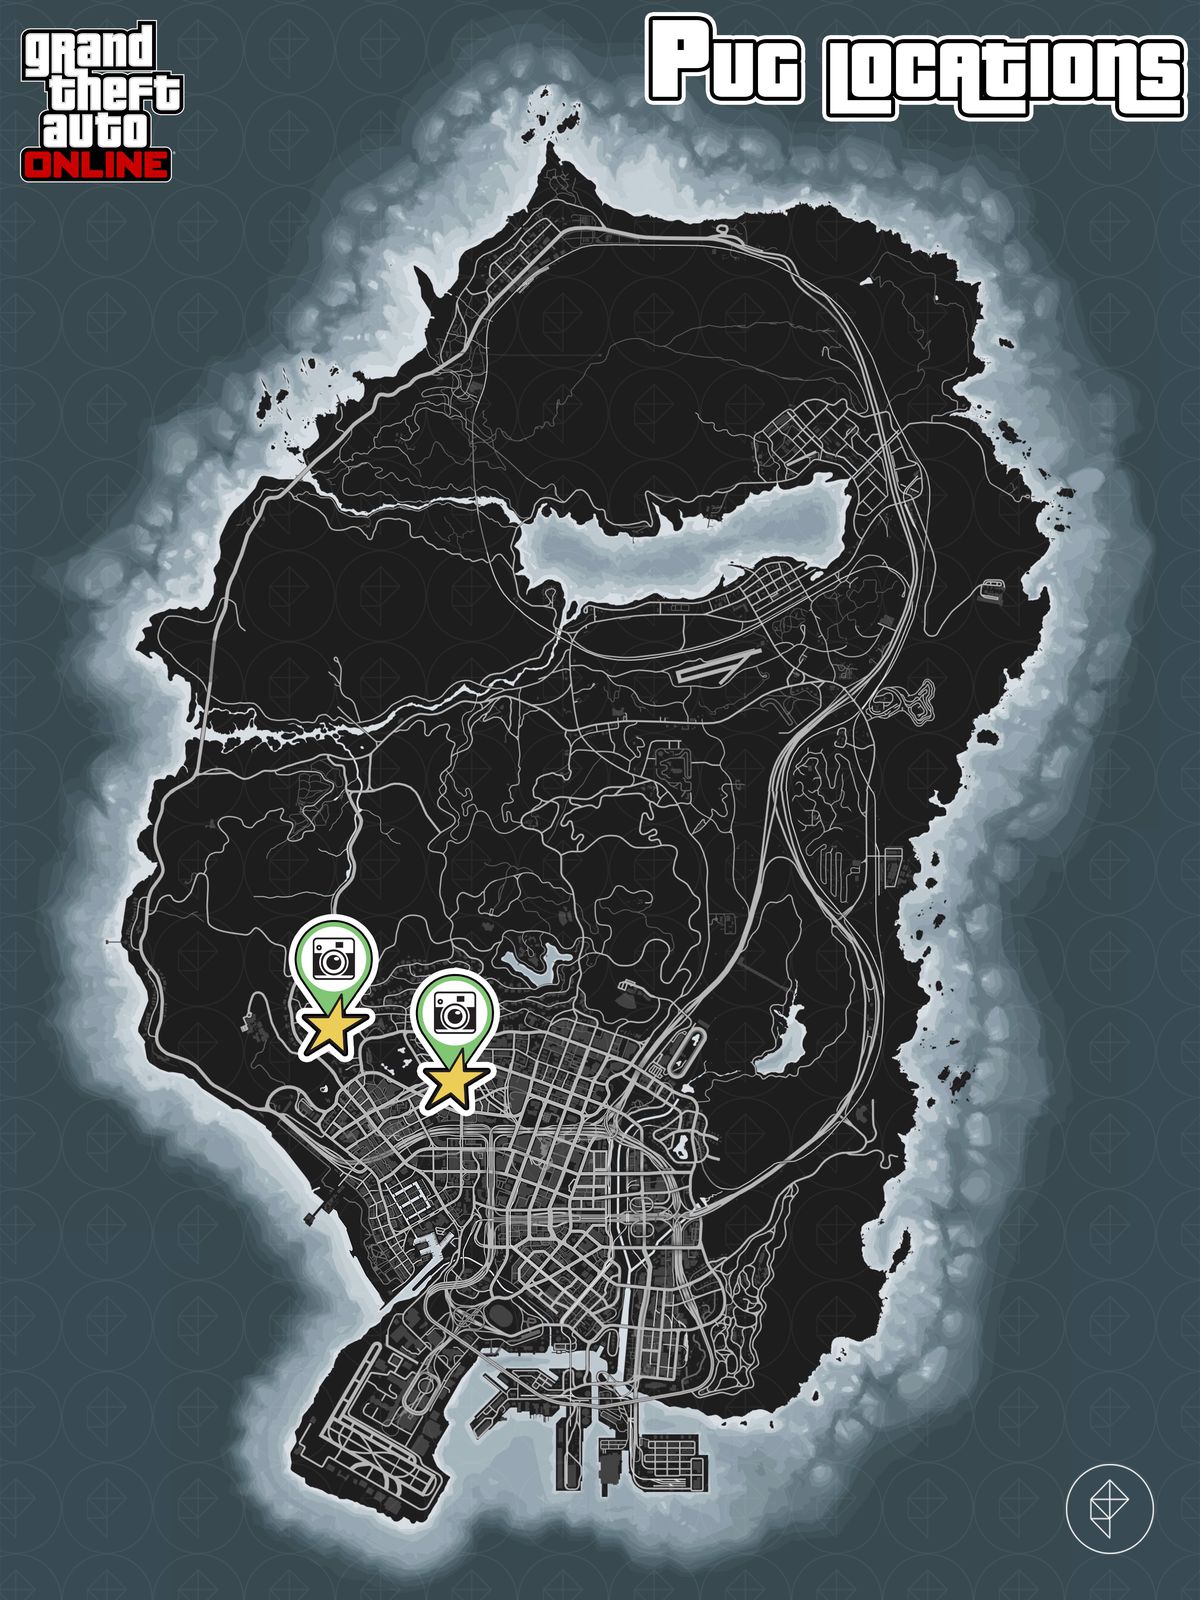 GTA Online map with pug locations